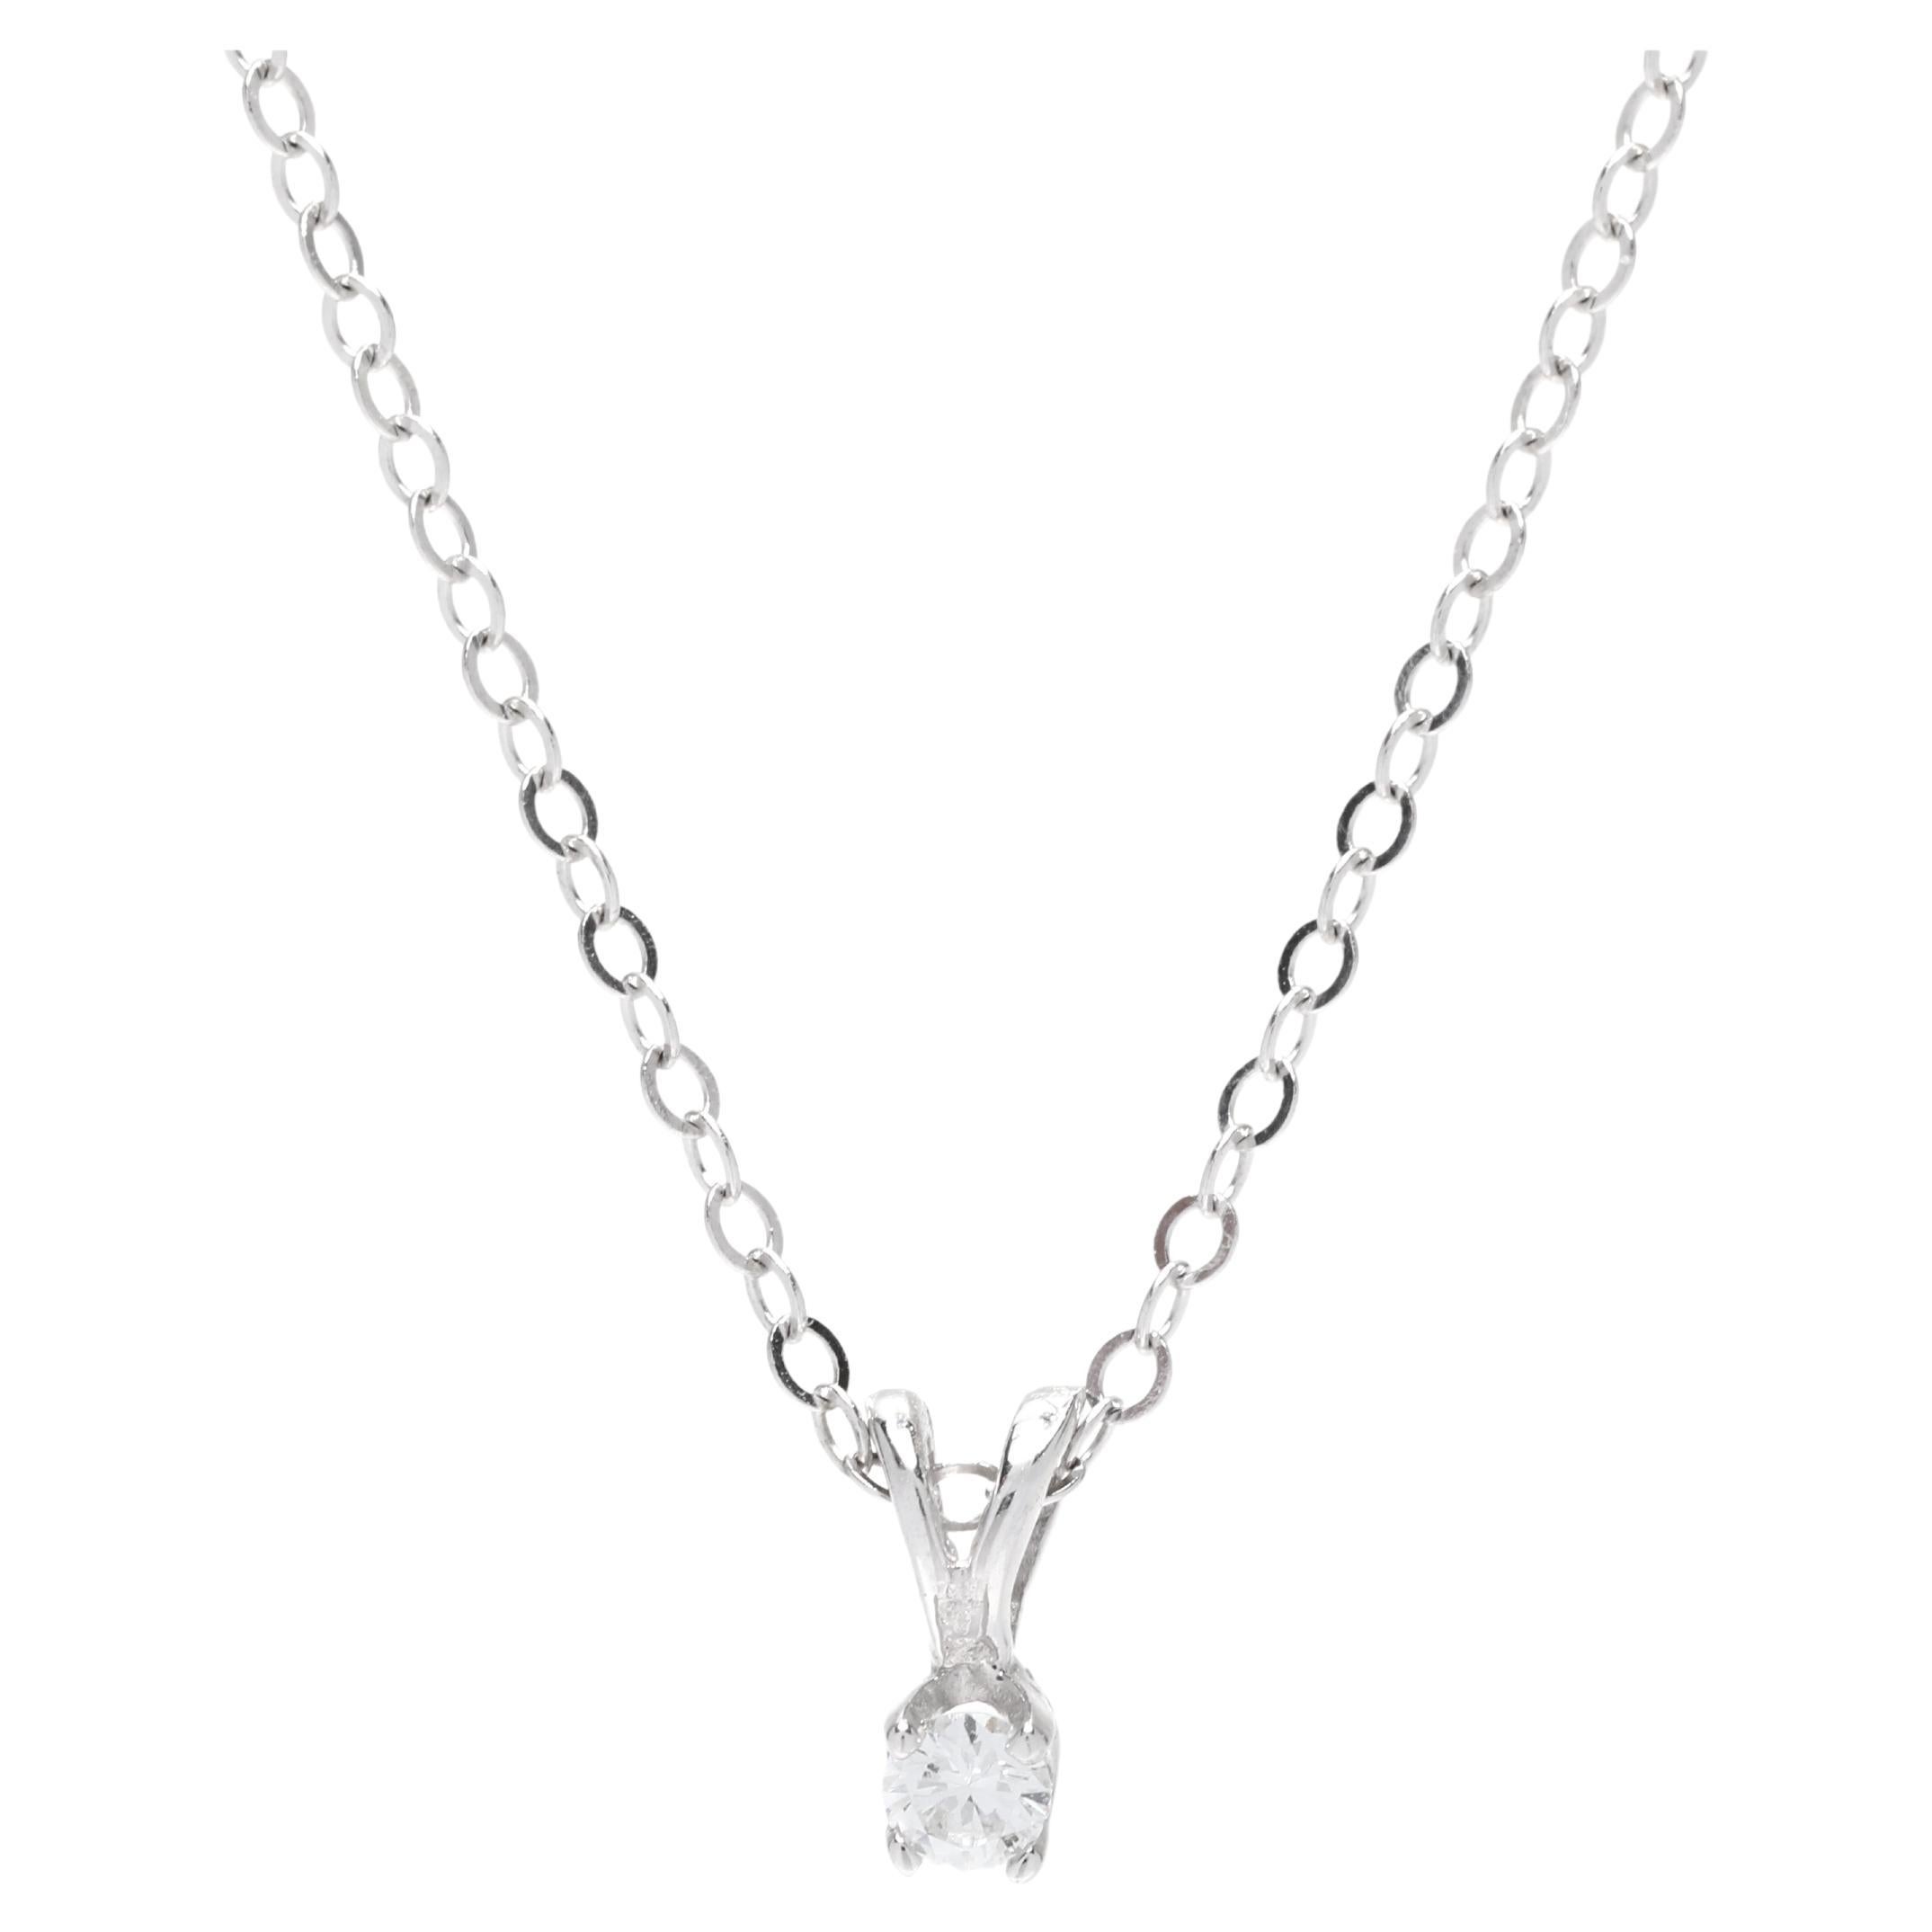 Tiny Diamond Solitaire Pendant Necklace, 14k White Gold, Teeny For Sale